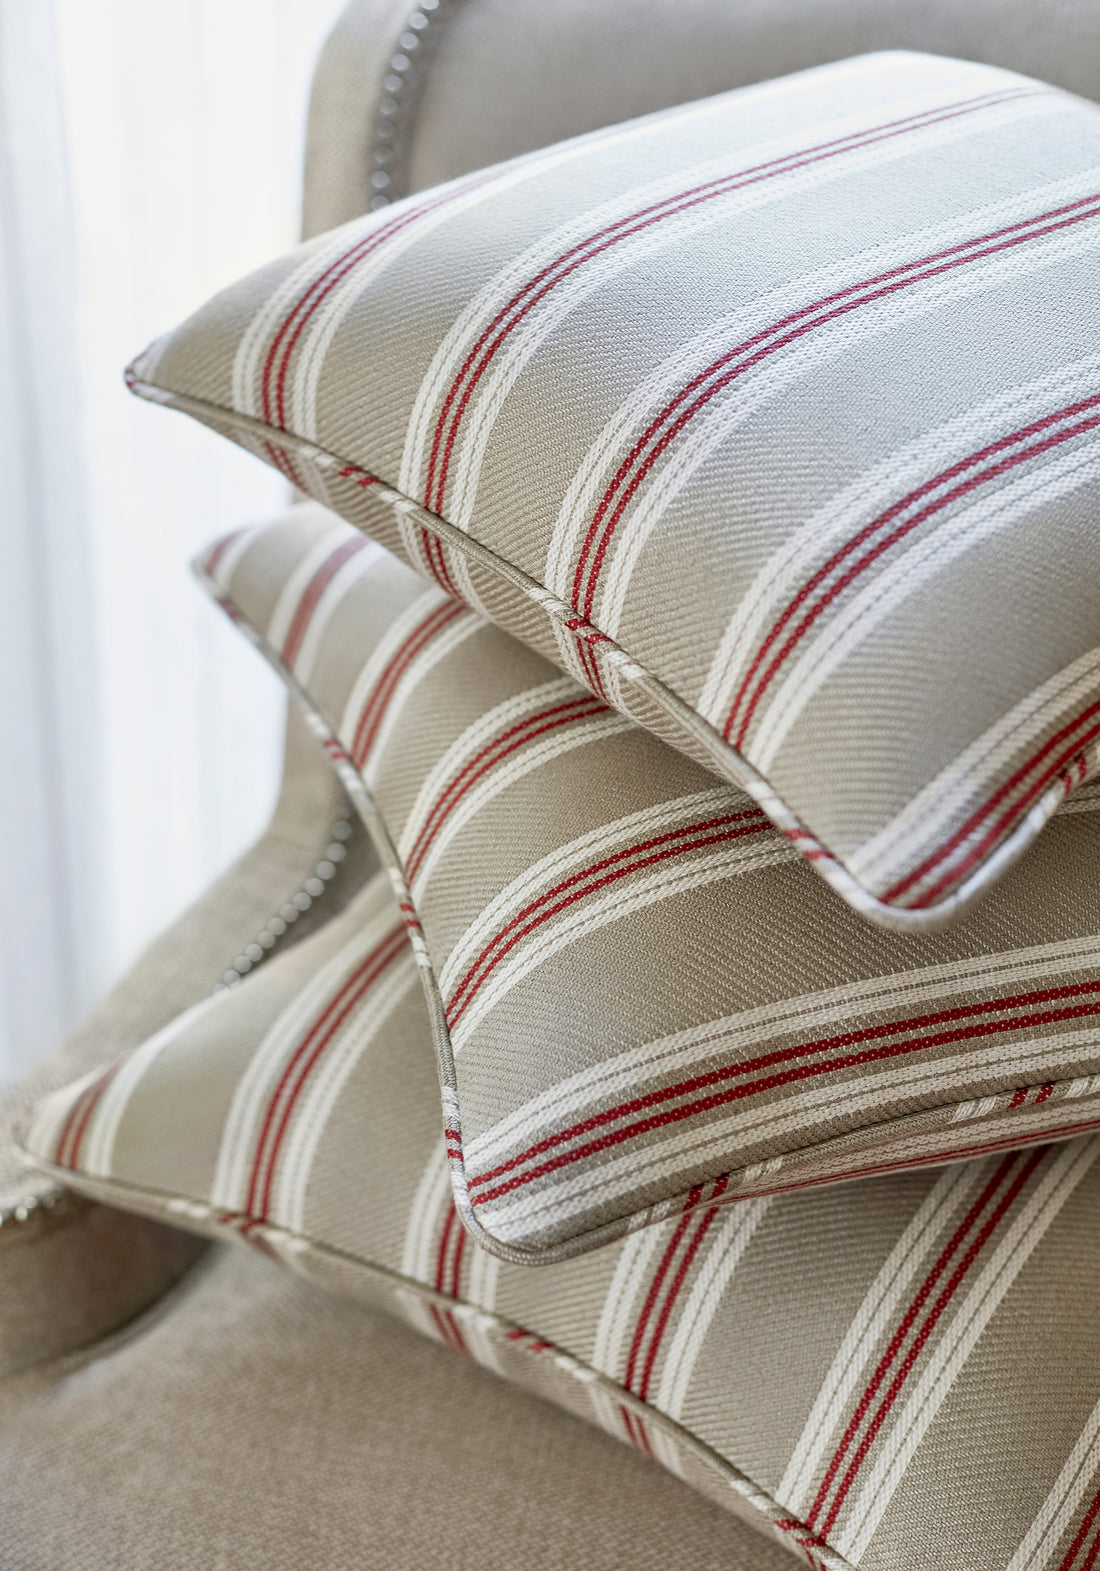 Detailed Colonnade Stripe woven fabric pillows in cardinal color - pattern number W80736 by Thibaut in the Woven Resource Vol 11 Rialto collection